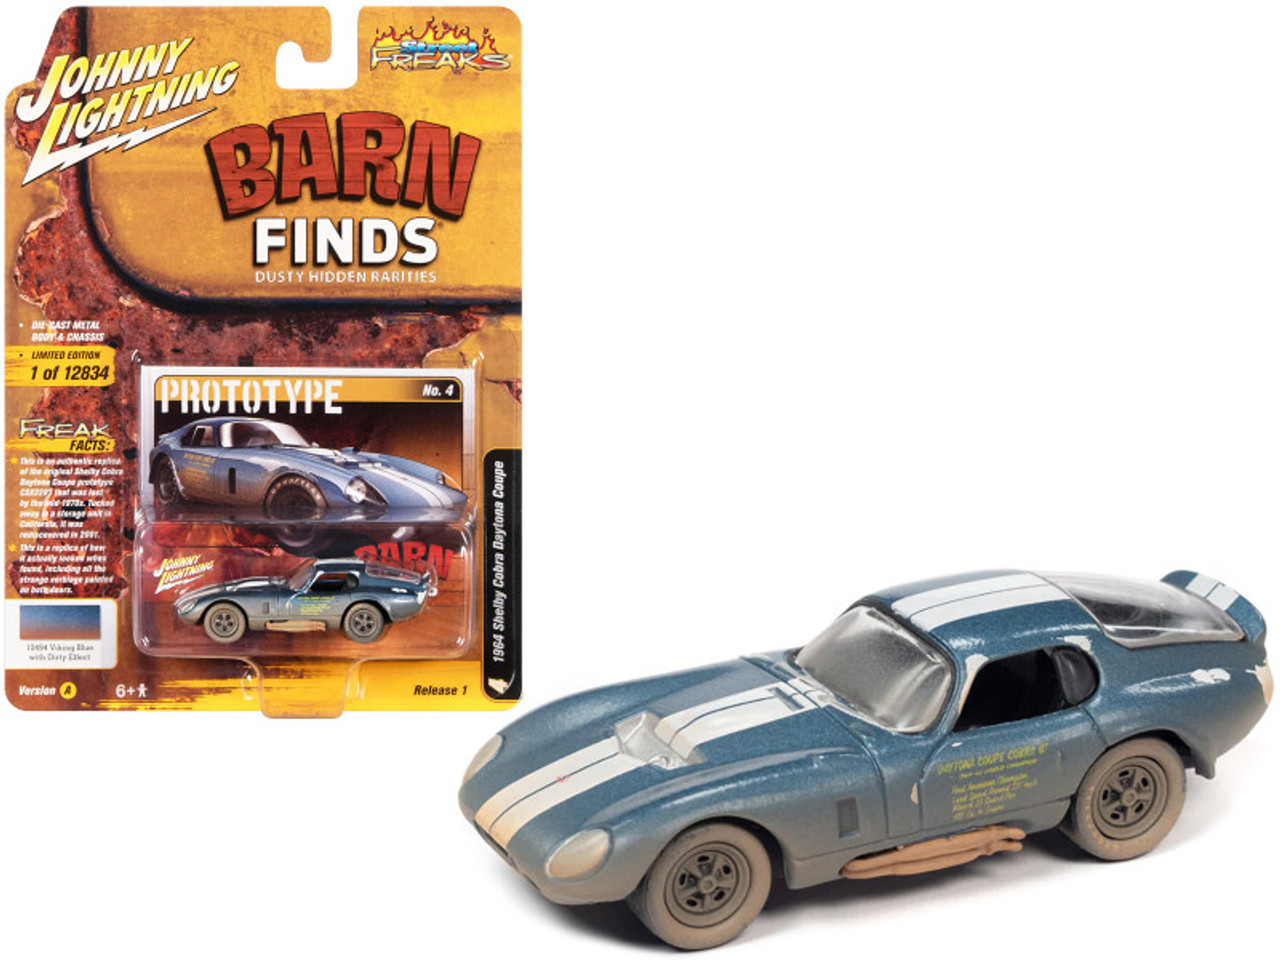 1964 Ford Shelby Cobra Daytona Coupe Viking Blue Metallic with White Stripes (Weathered) "Barn Finds" Limited Edition to 12834 pieces Worldwide "Street Freaks" Series 1/64 Diecast Model Car by Johnny Lightning